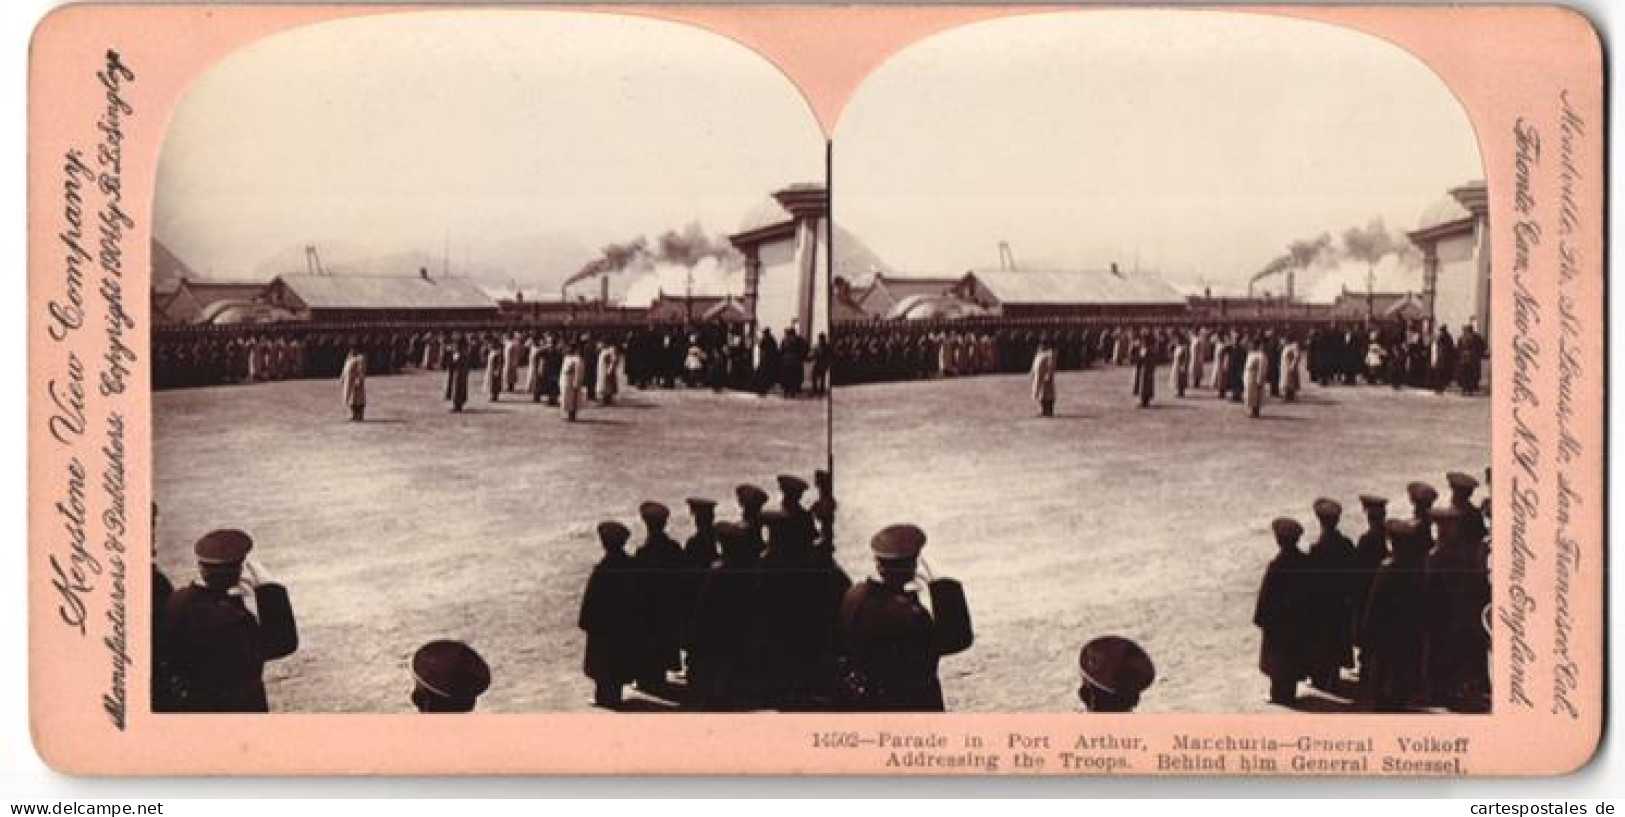 Stereo-Fotografie Keystone View Company, Meadville /Pa, Ansicht Port Arthur /Manchuria, Parade - General Volkoff  - Stereo-Photographie